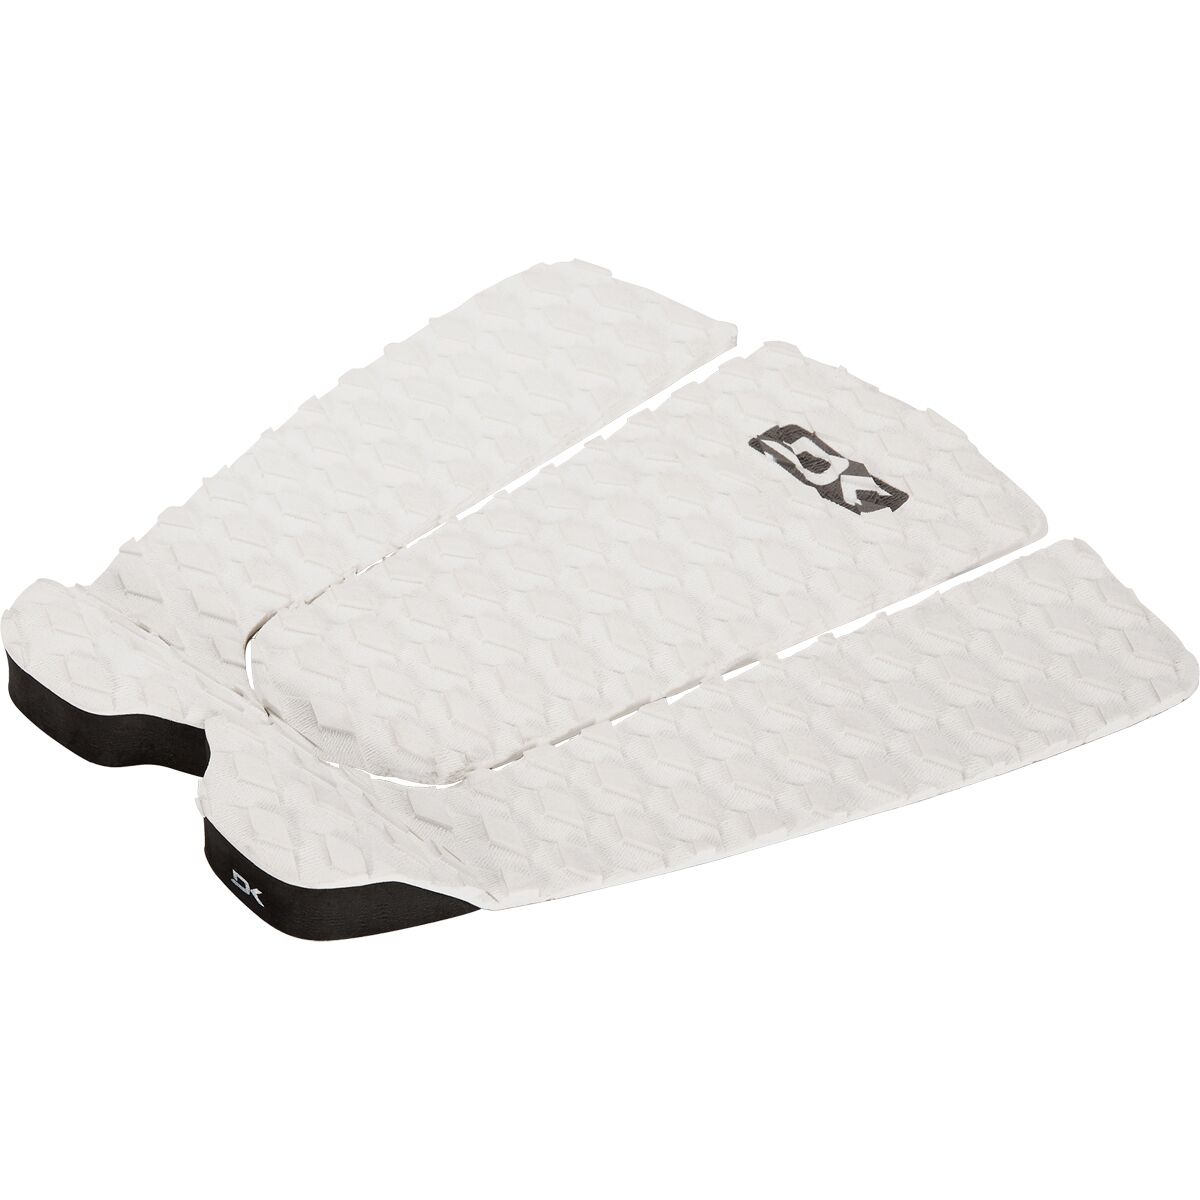 DAKINE Andy Irons Pro Model Traction Pad